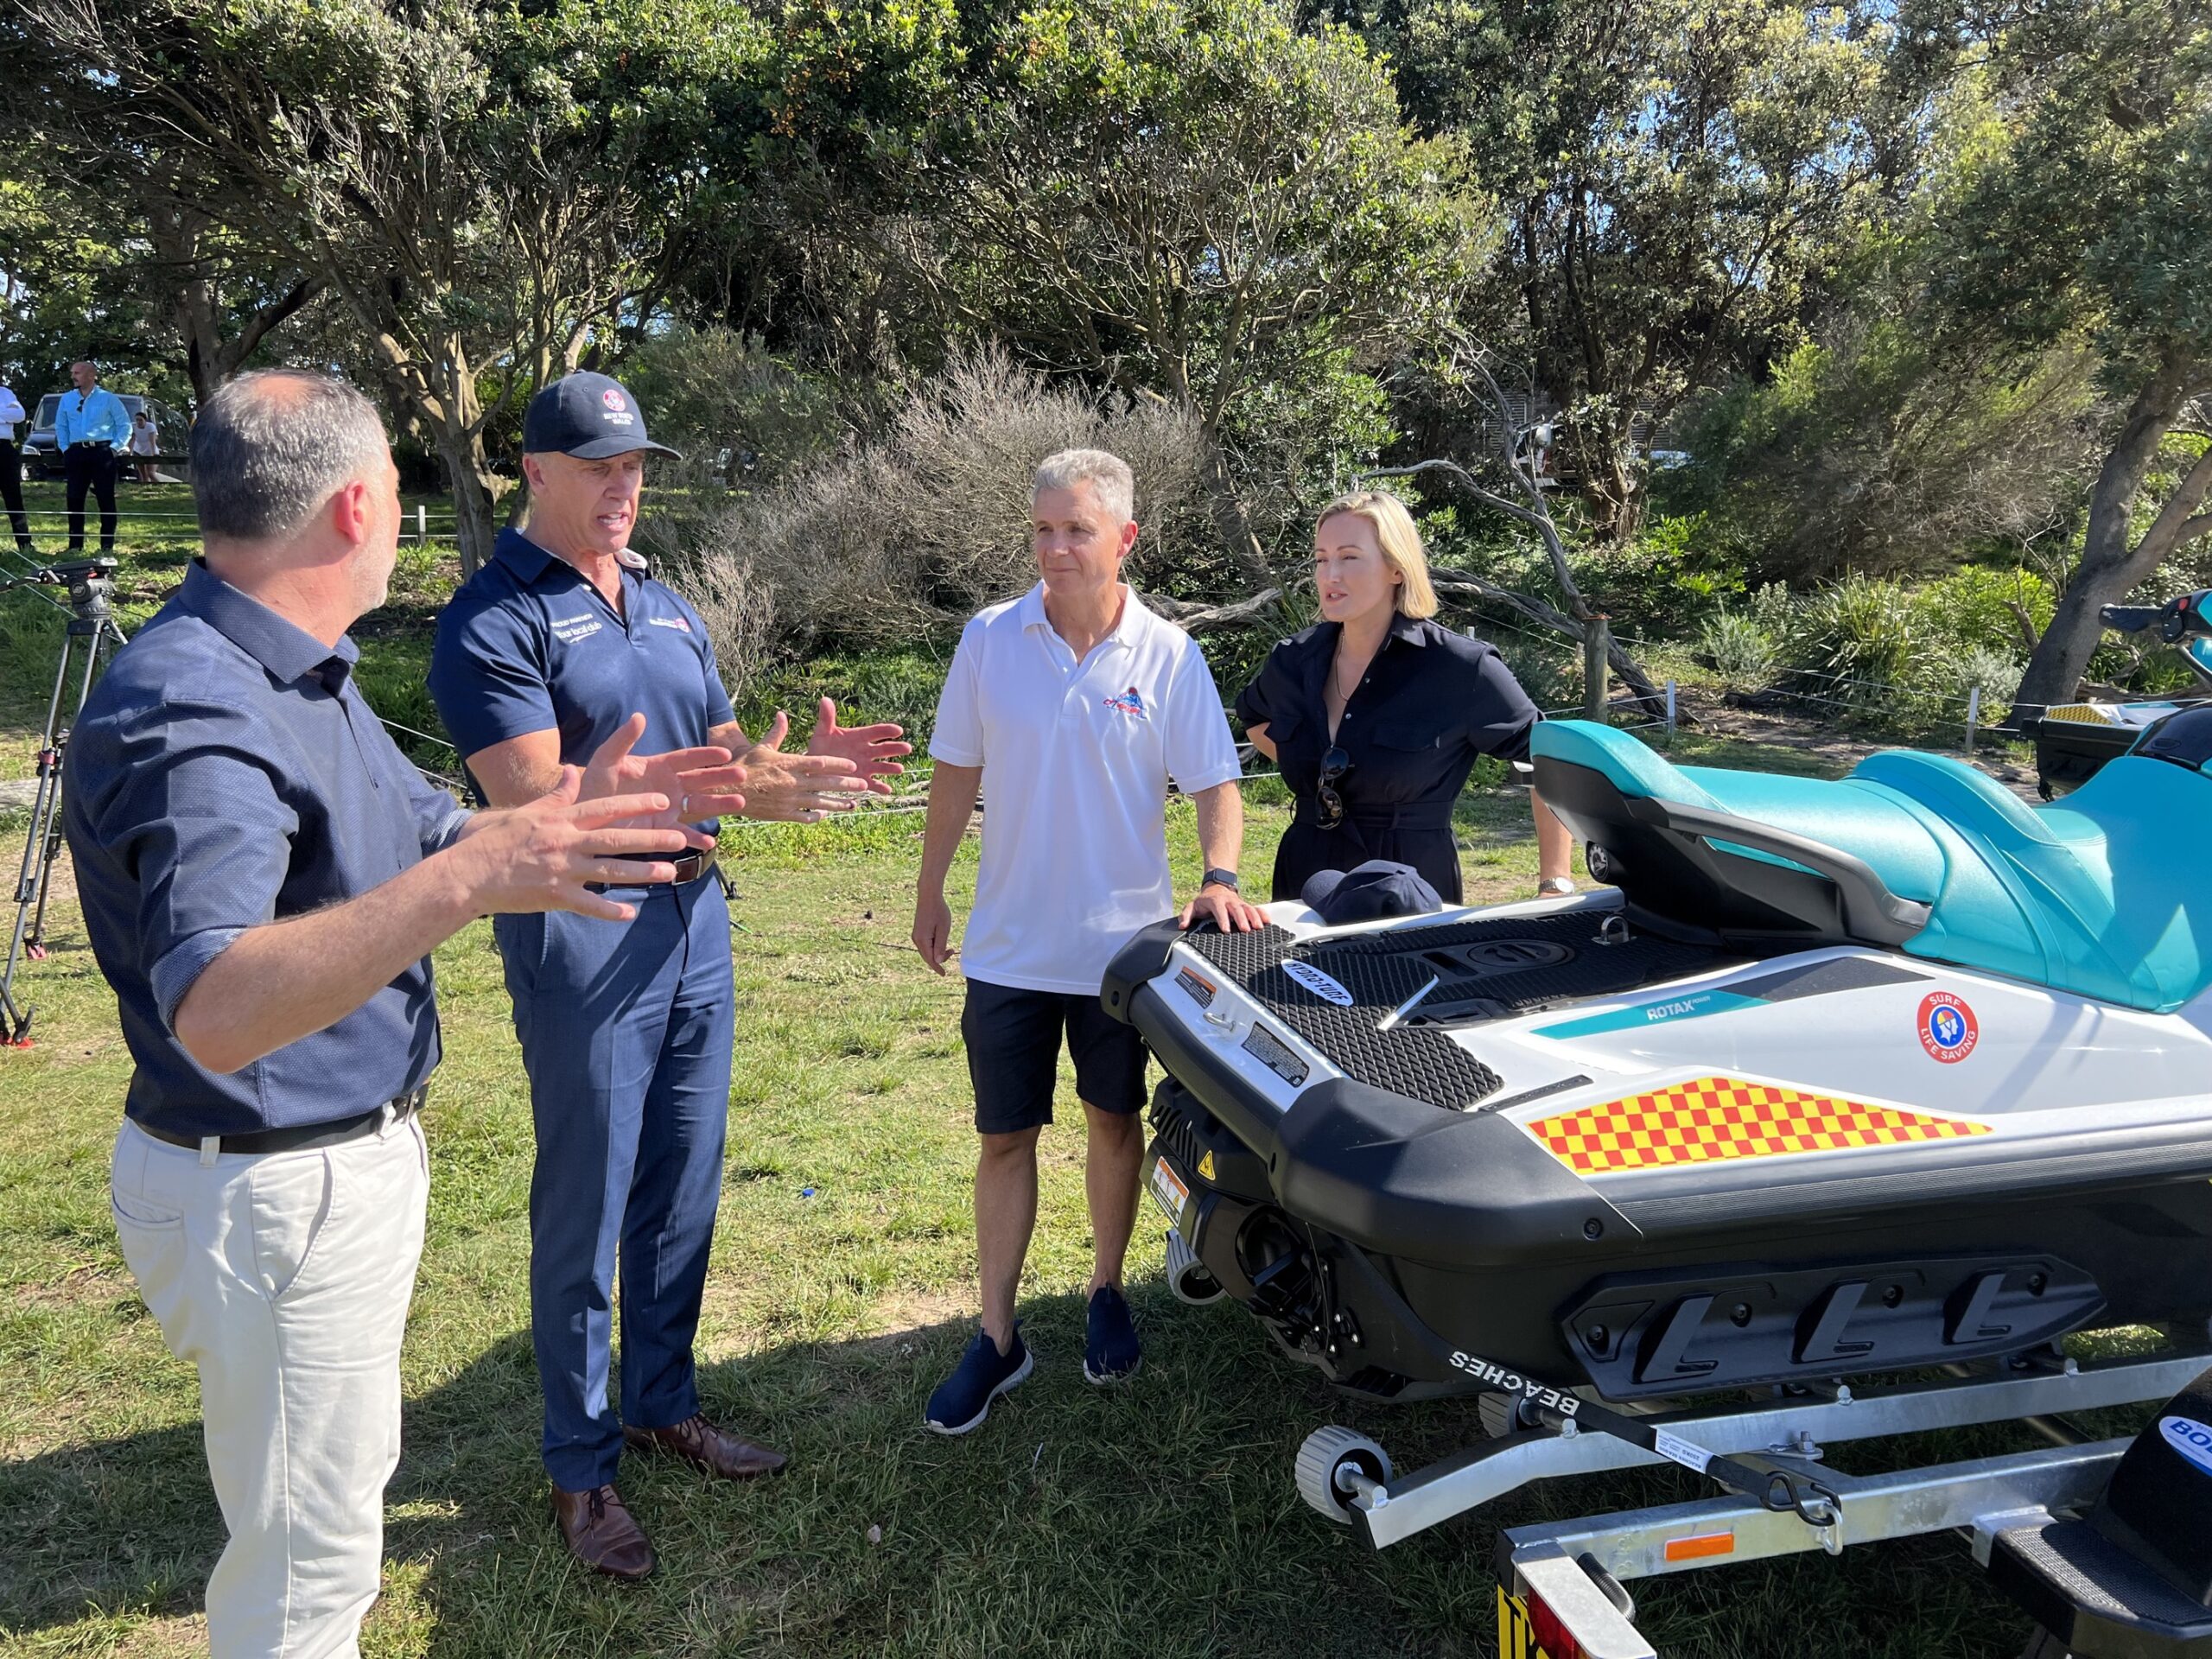 Minister for Emergency Services Jihad Dib2, Member for Coogee Dr Marjorie O’Neill, Federal Member for Kingsford Smith Matt Thistlethwaite and SLSNSW CEO Steve Pearce talking around jetski